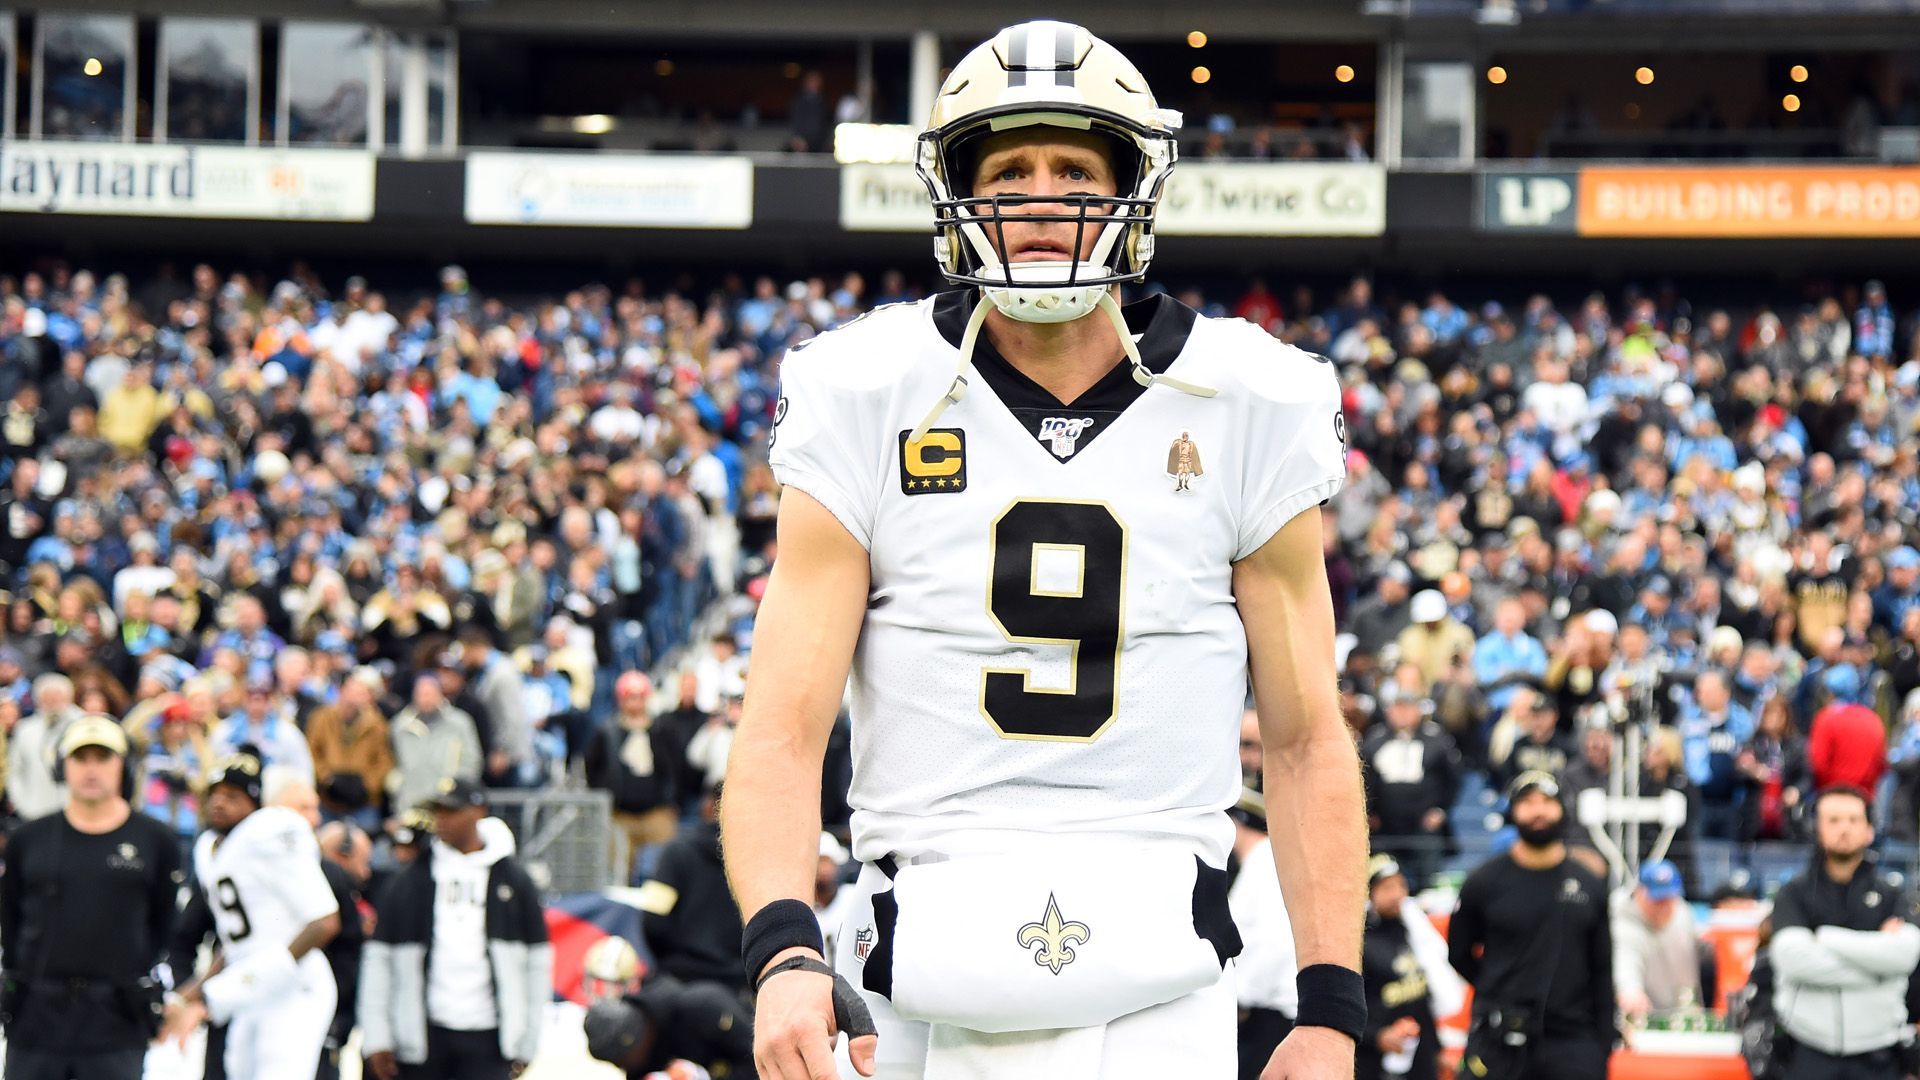 Drew Brees apologizes for 'insensitive' comments on NFL players kneeling